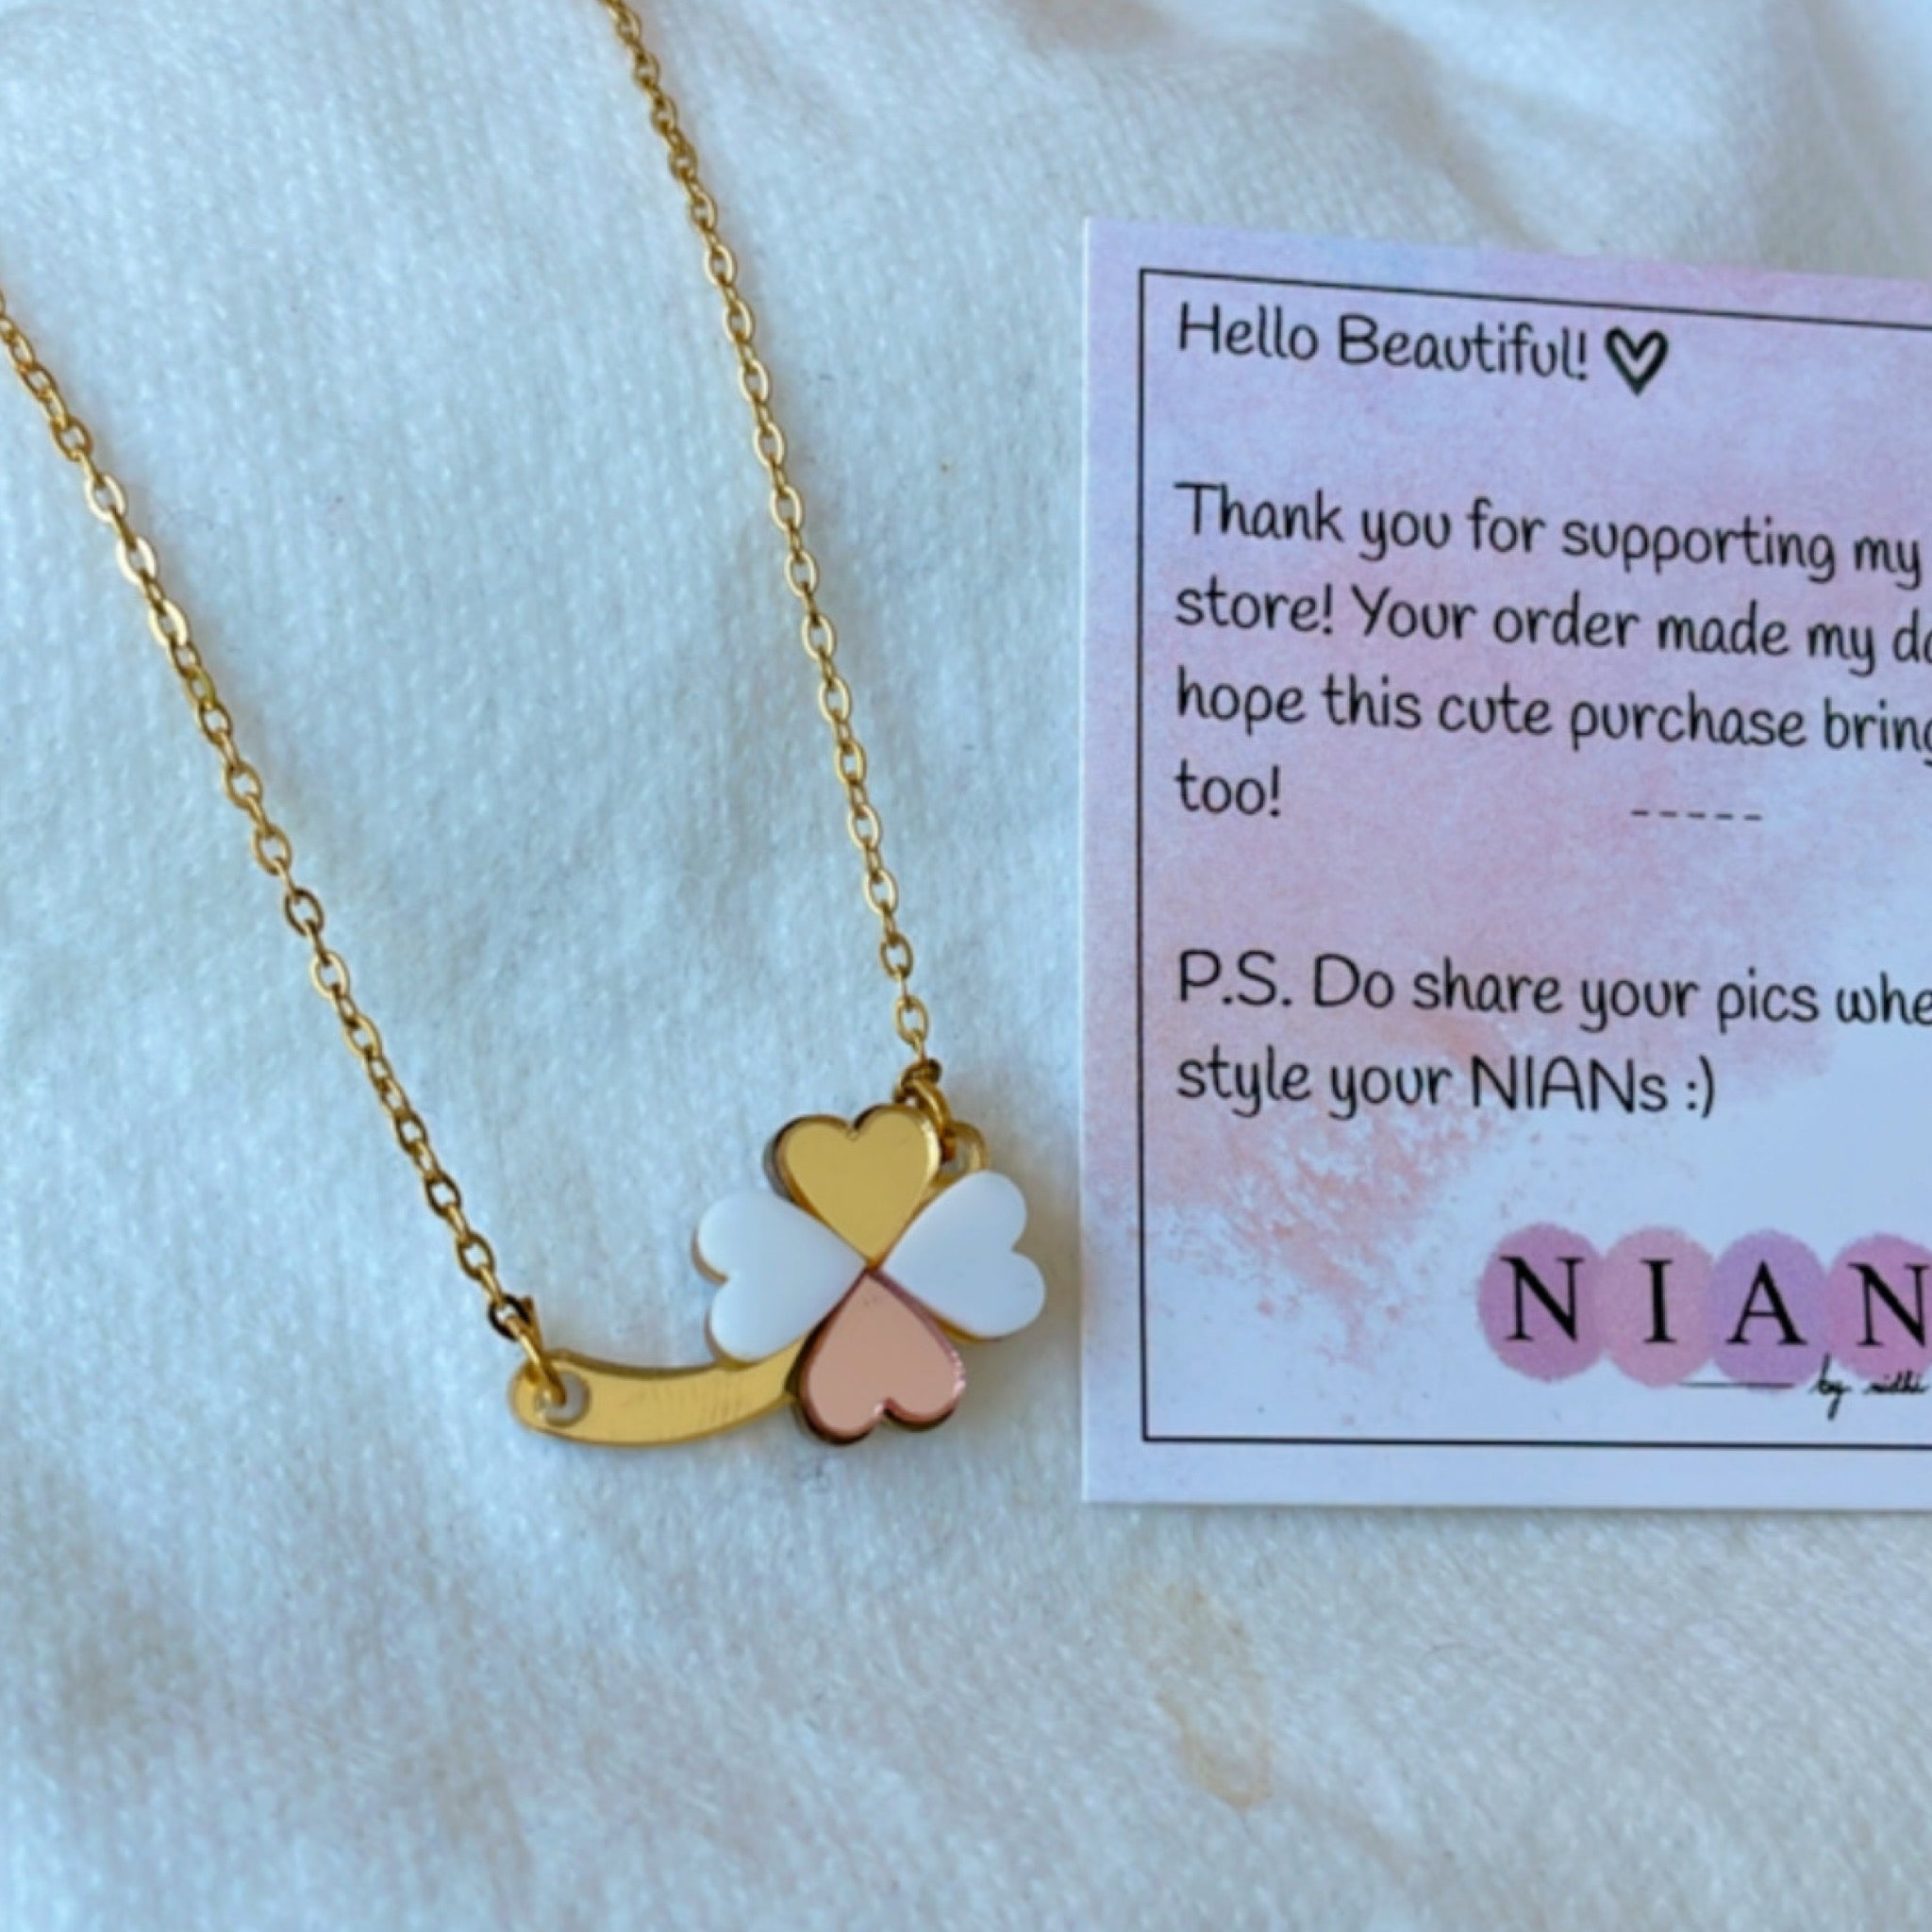 Clover Necklace - White, Rosegold, and Golden - Nian by Nidhi - placed on a Nian by Nidhi product card, in a white background